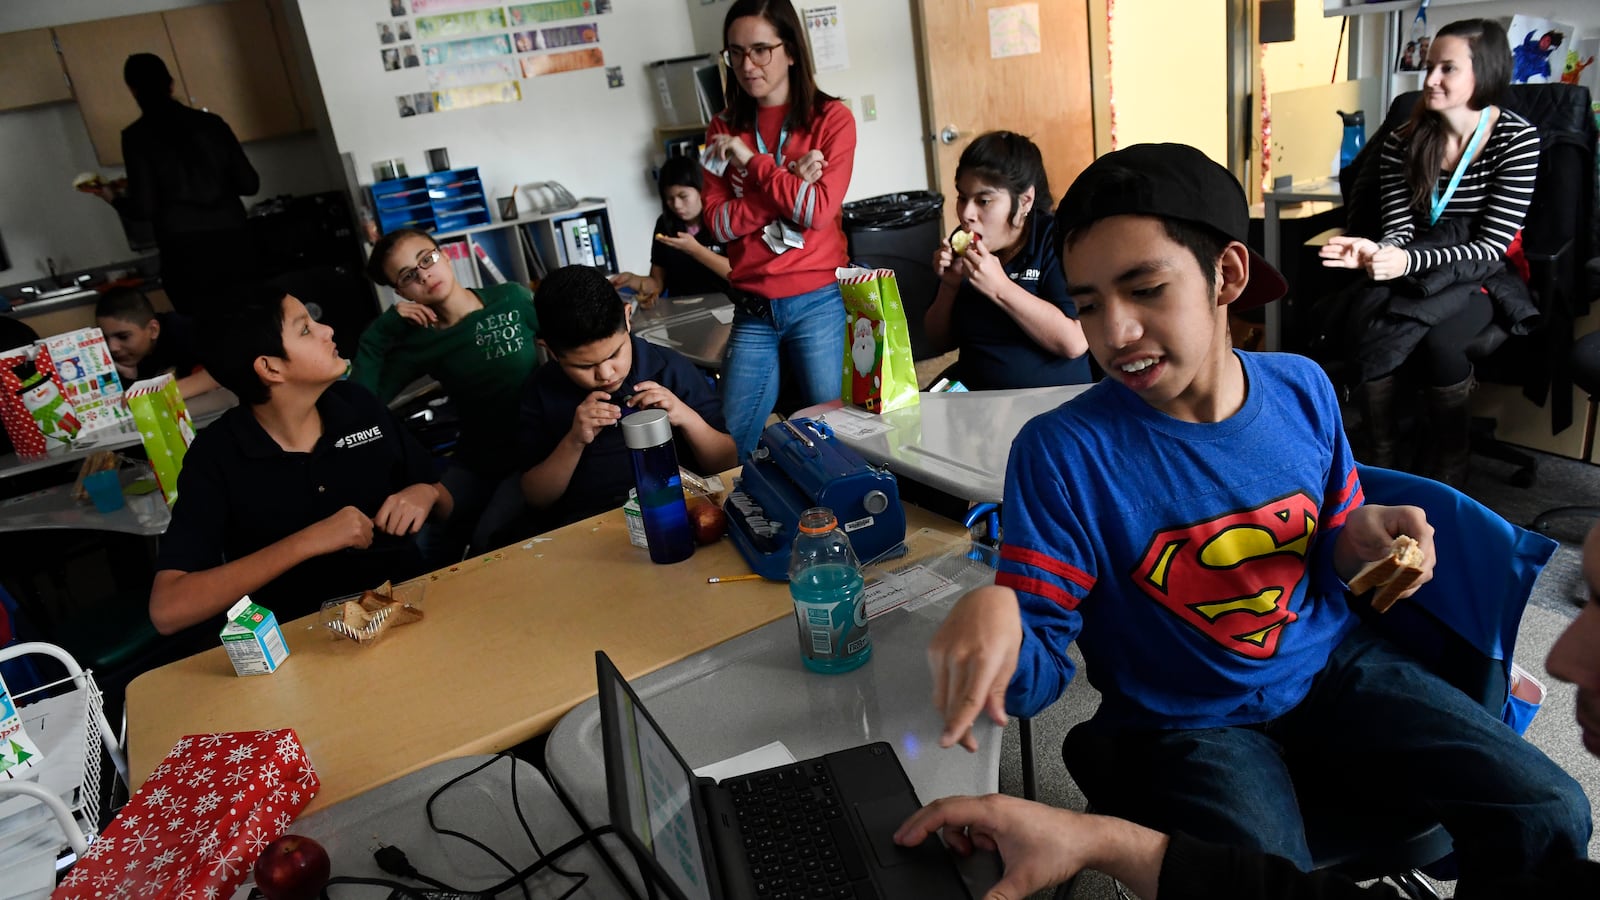 Josue Bonilla, 13, in Superman shirt, in STRIVE Prep Federal's Wisconsin classroom (Photo by Helen H. Richardson/The Denver Post for Chalkbeat).